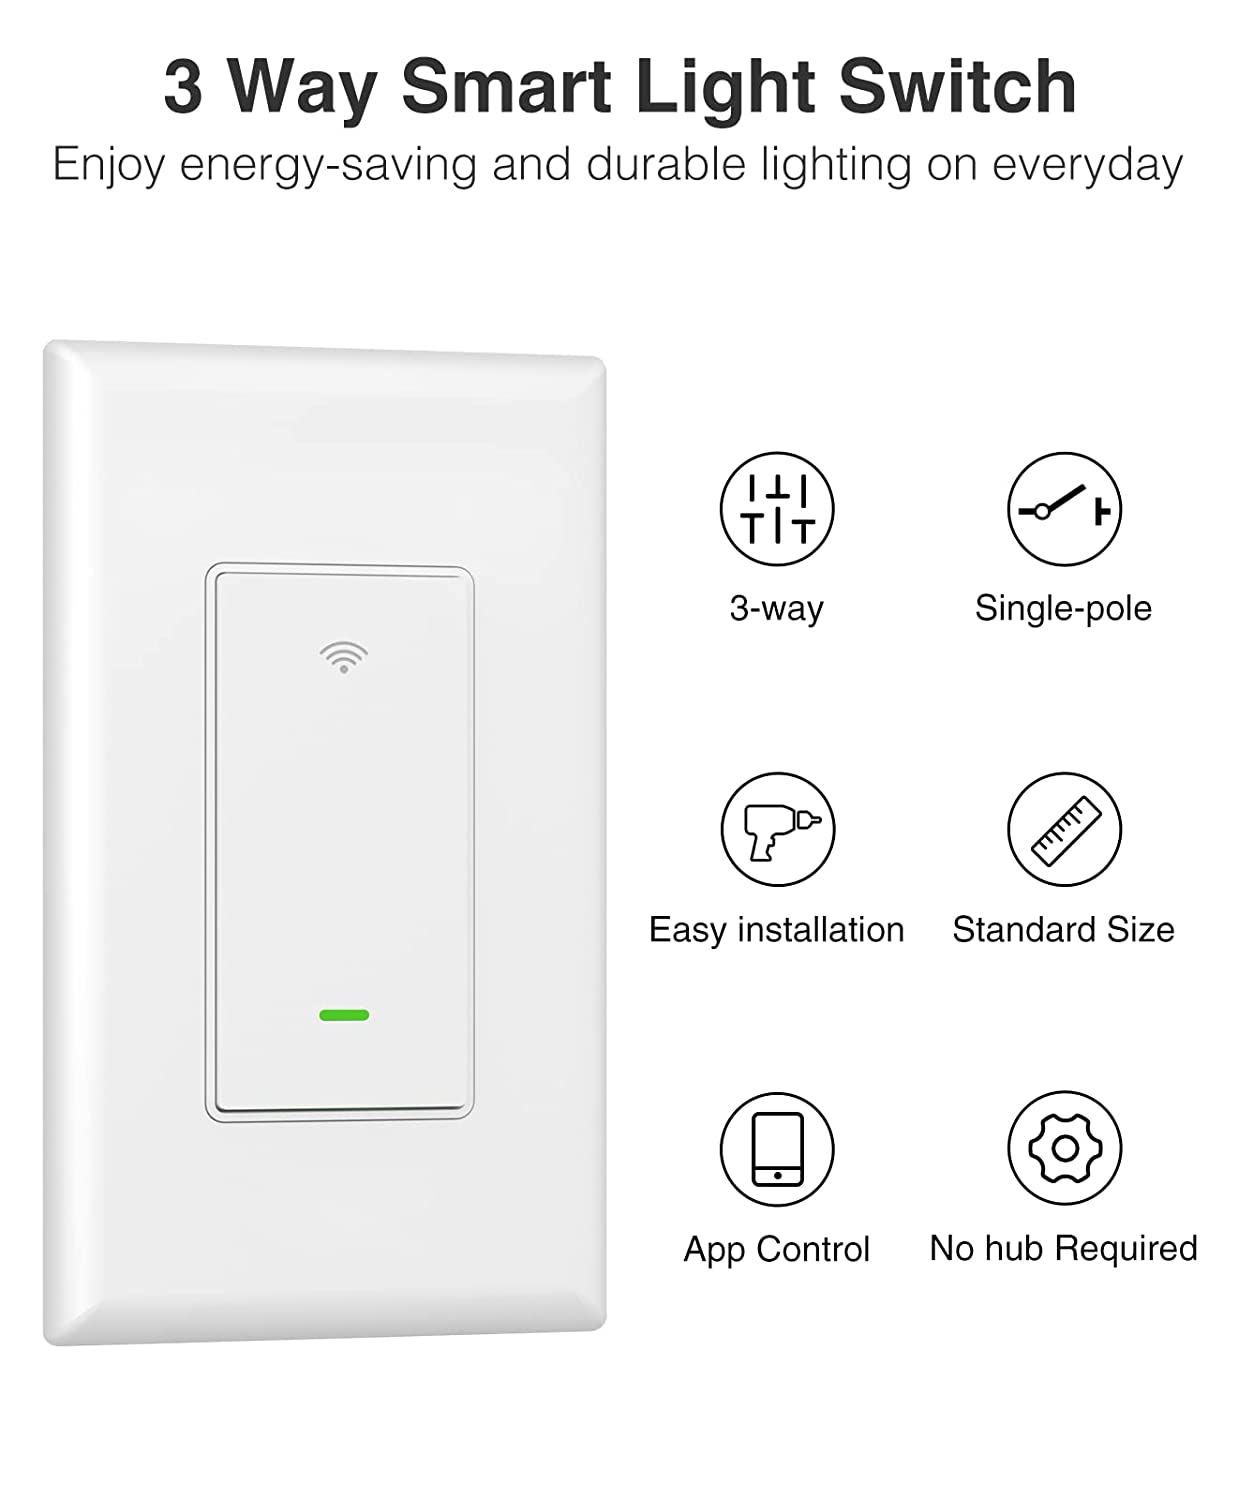 GHome Smart 3 Way Smart Switch with Sunrise Sunset Feature, 2.4GHz Remote Control, 3-Way Installation, FCC Listed (4-Pack), White